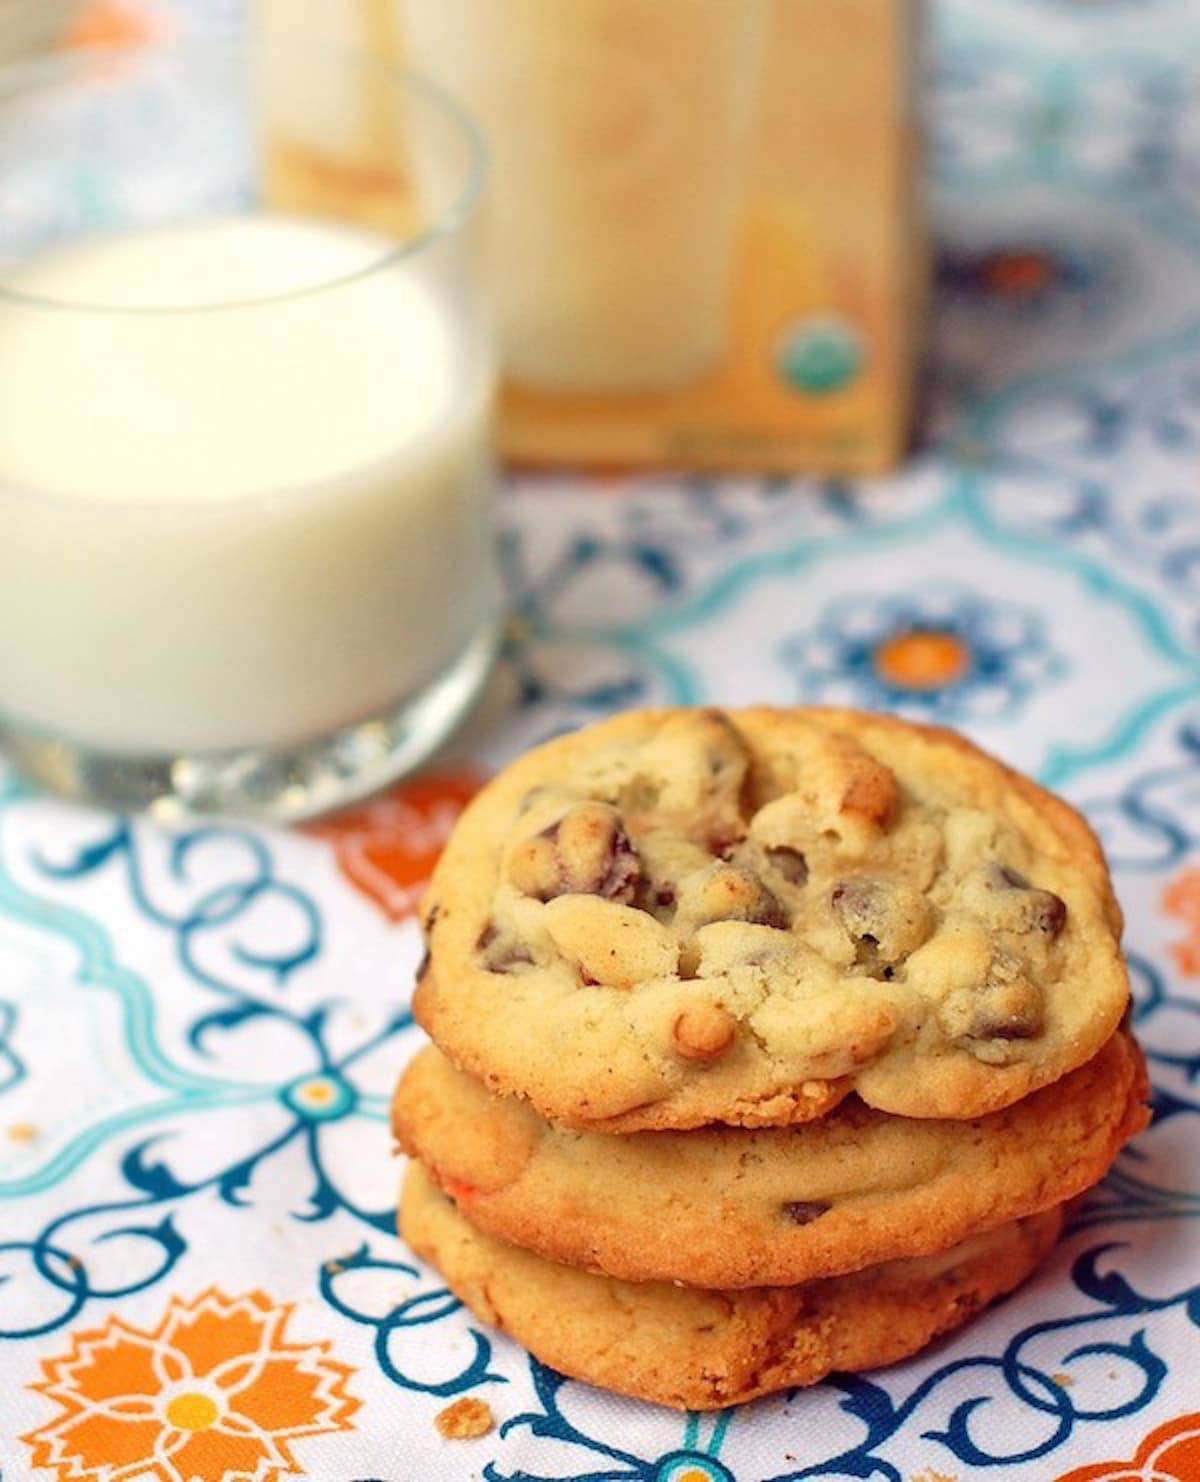 Peanut butter pretzel cookies stacked on each other next to a glass of milk.